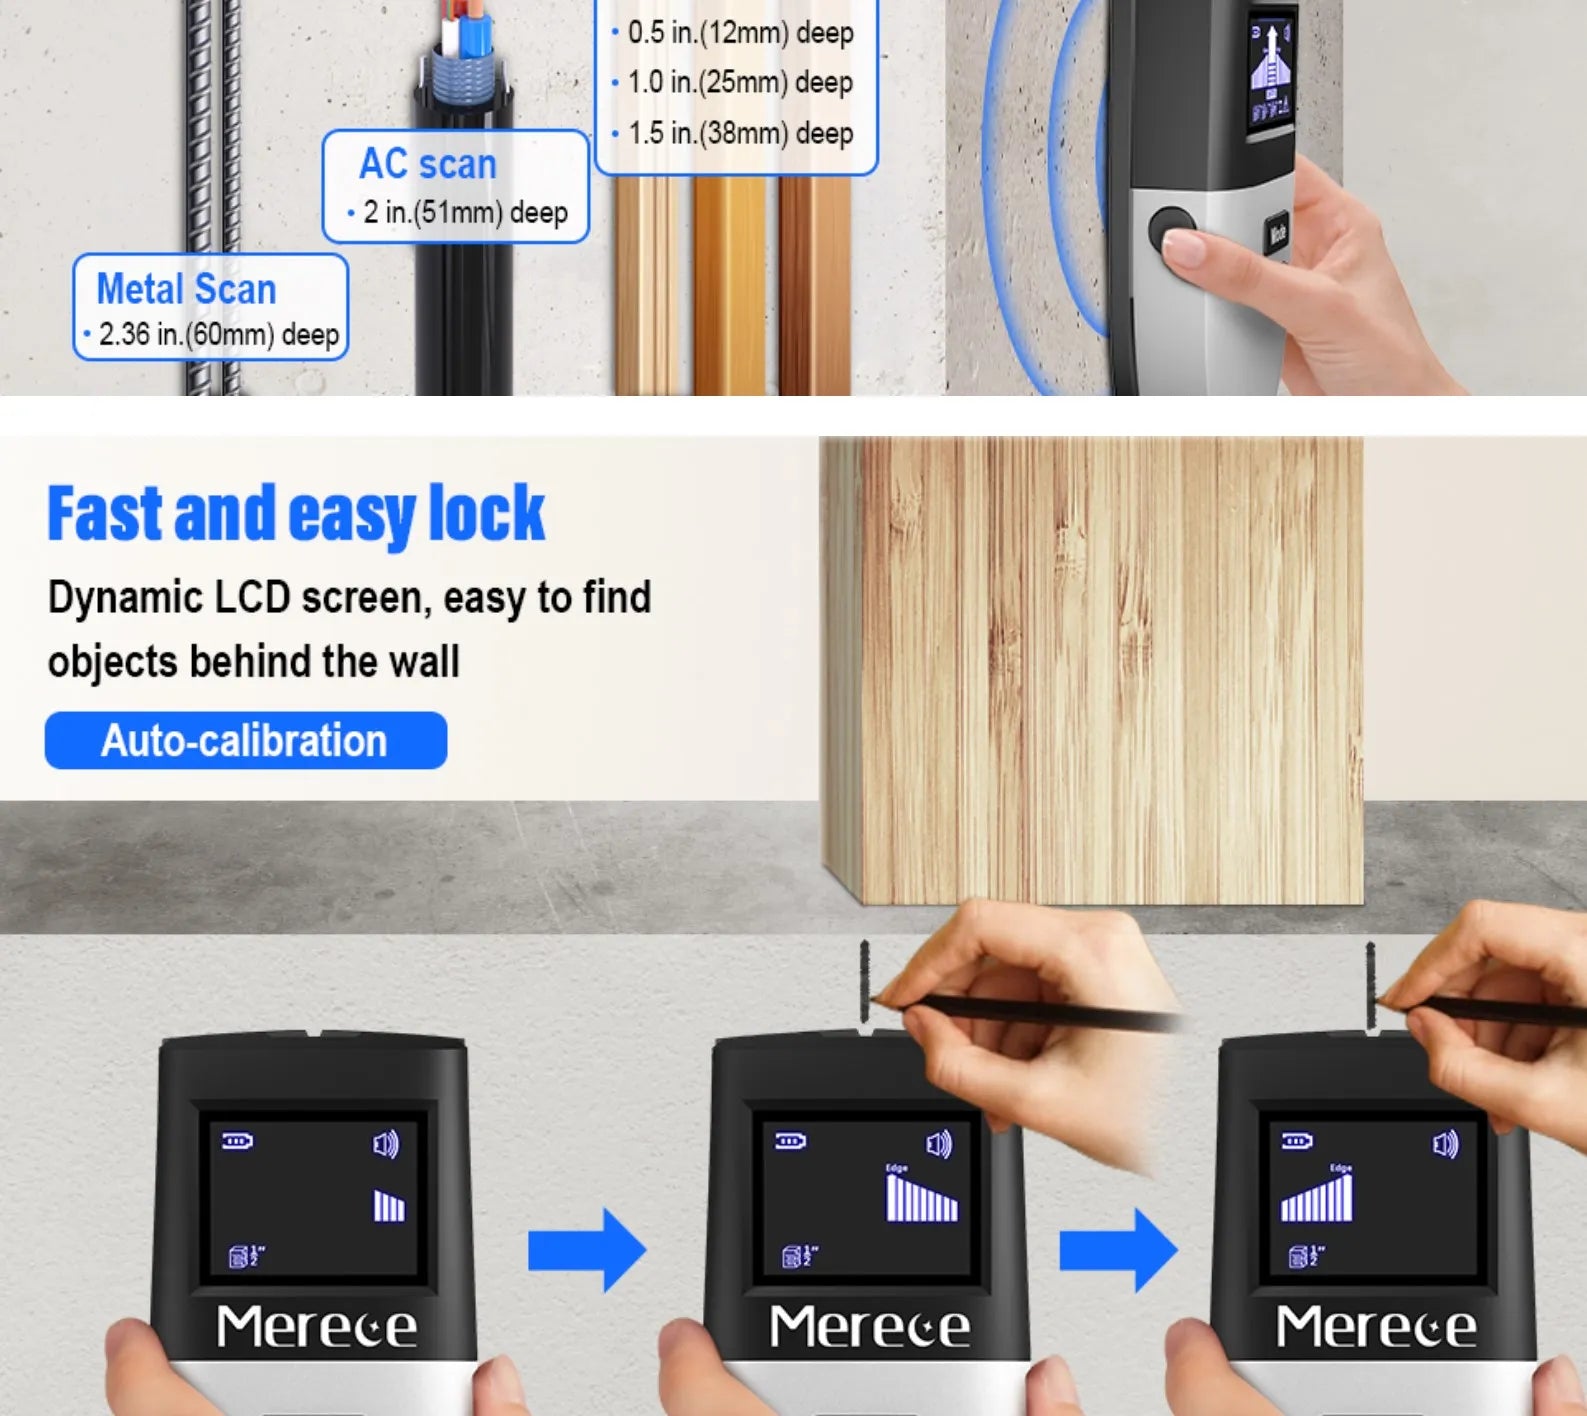 Merece Stud Finder Wall Scanner, 5 in 1 Stud Sensor – Center Finding with LCD Display